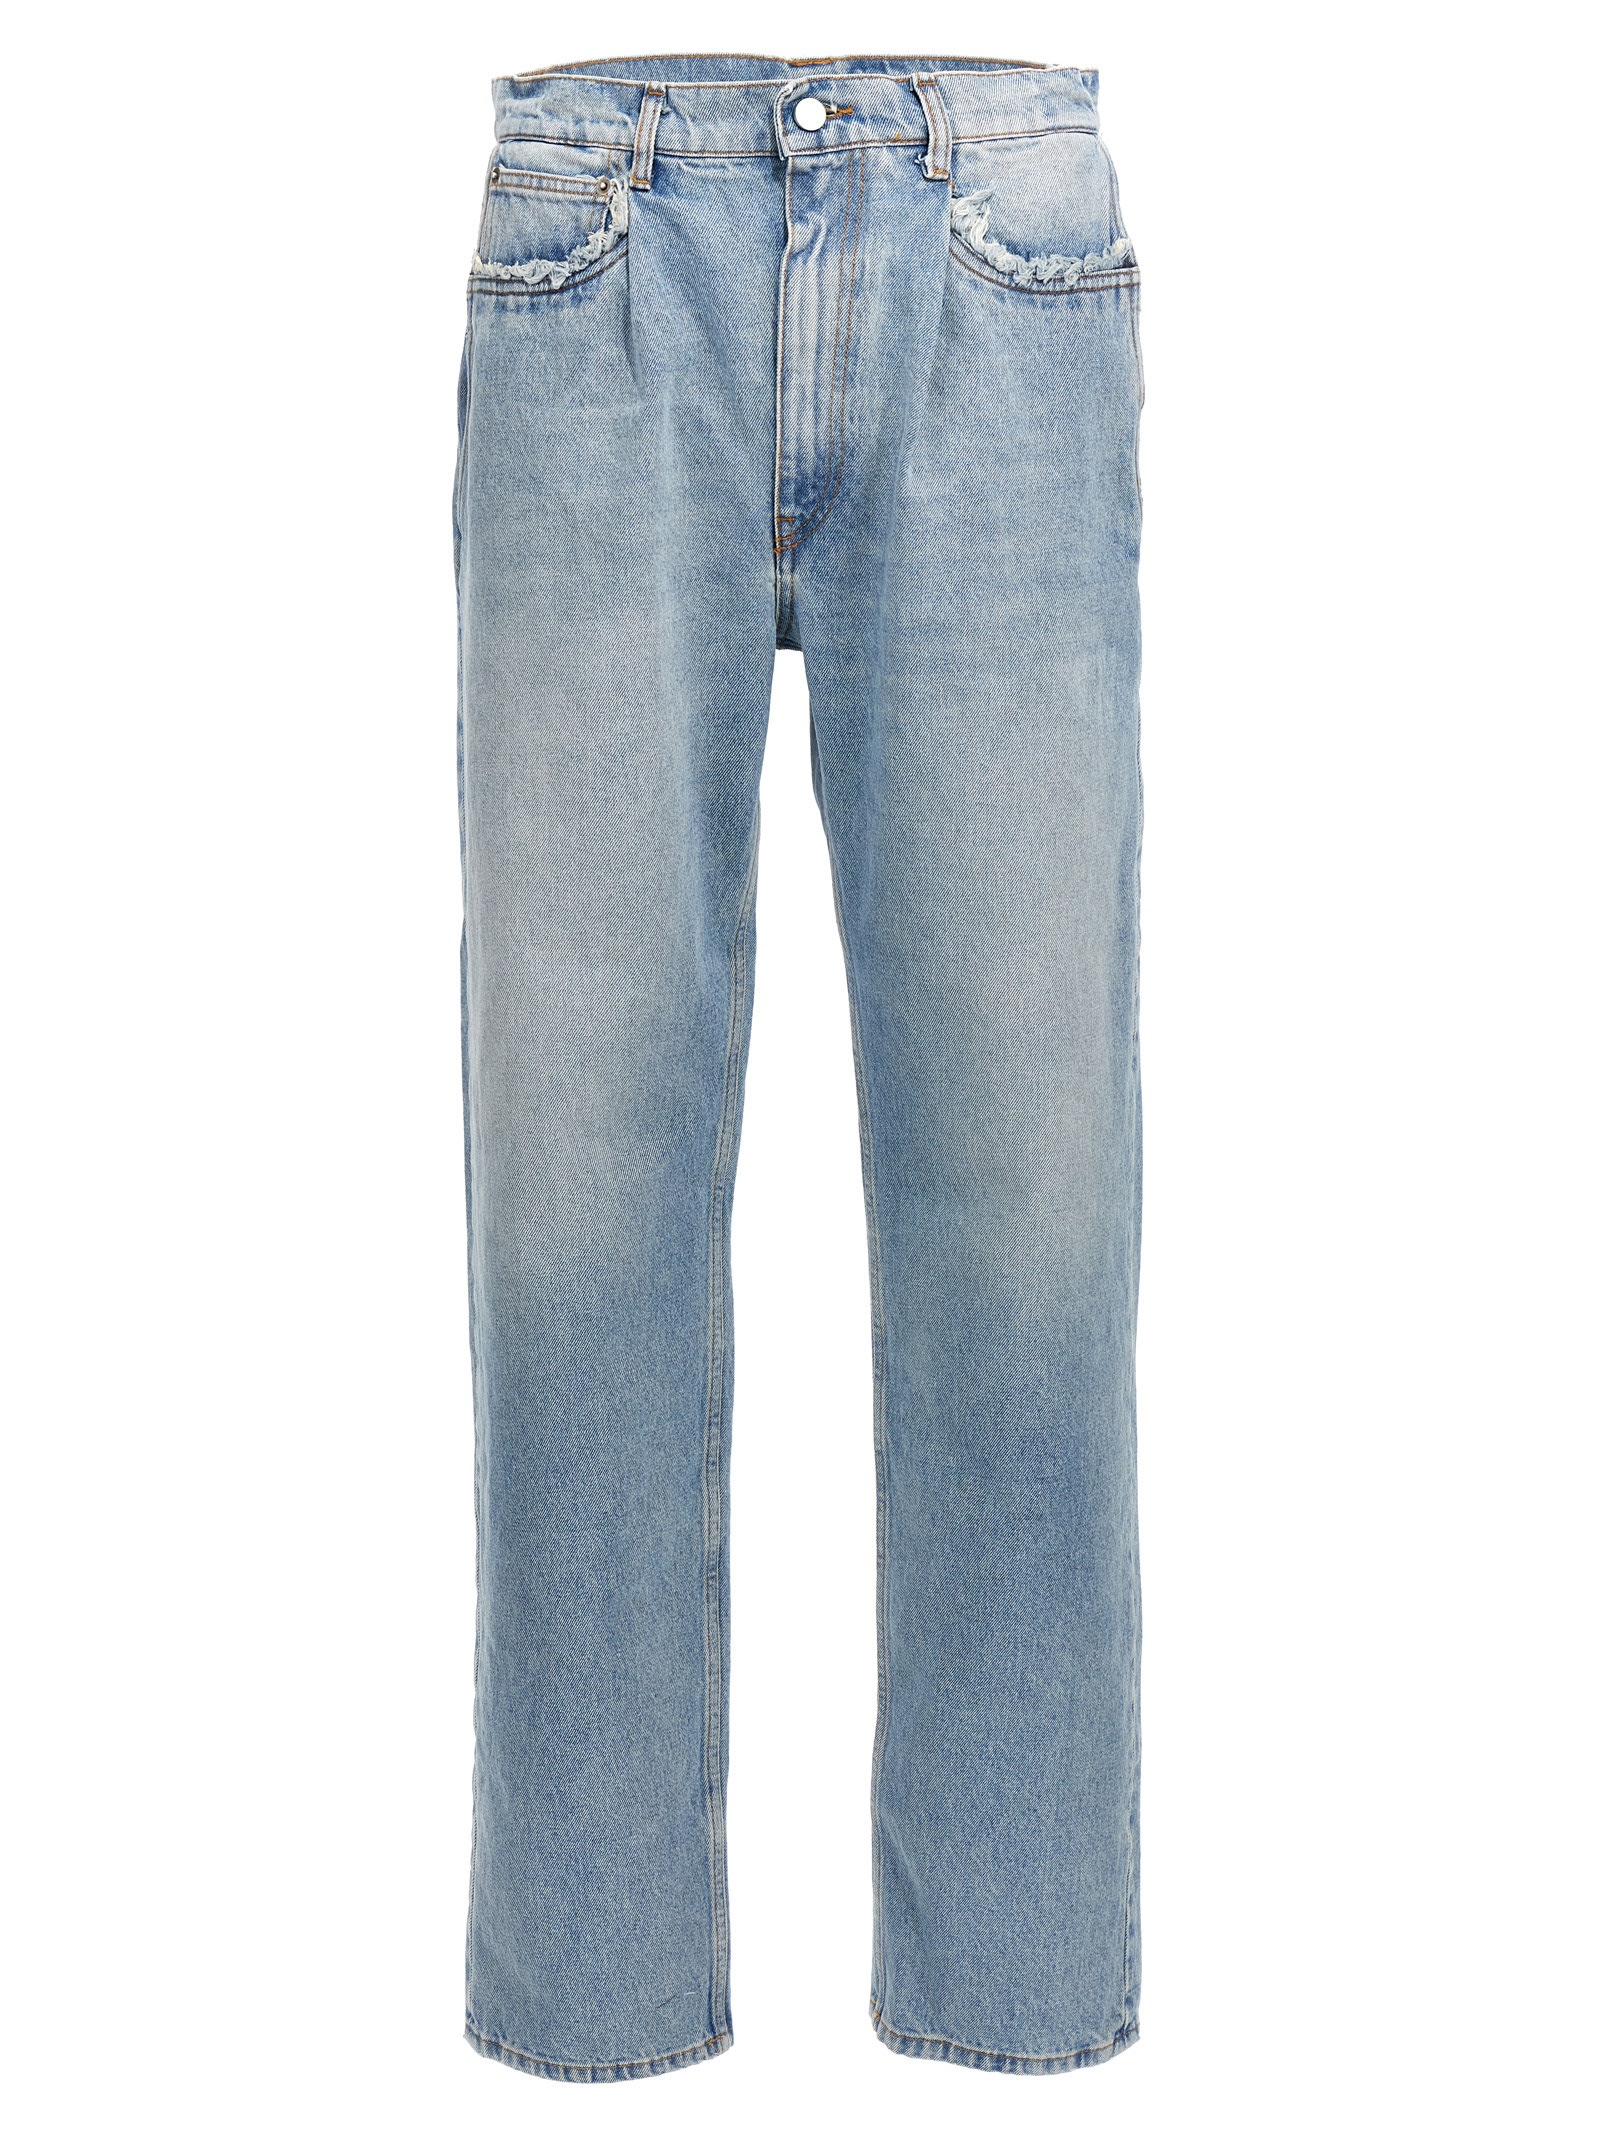 HED MAYNER STONE WASH JEANS